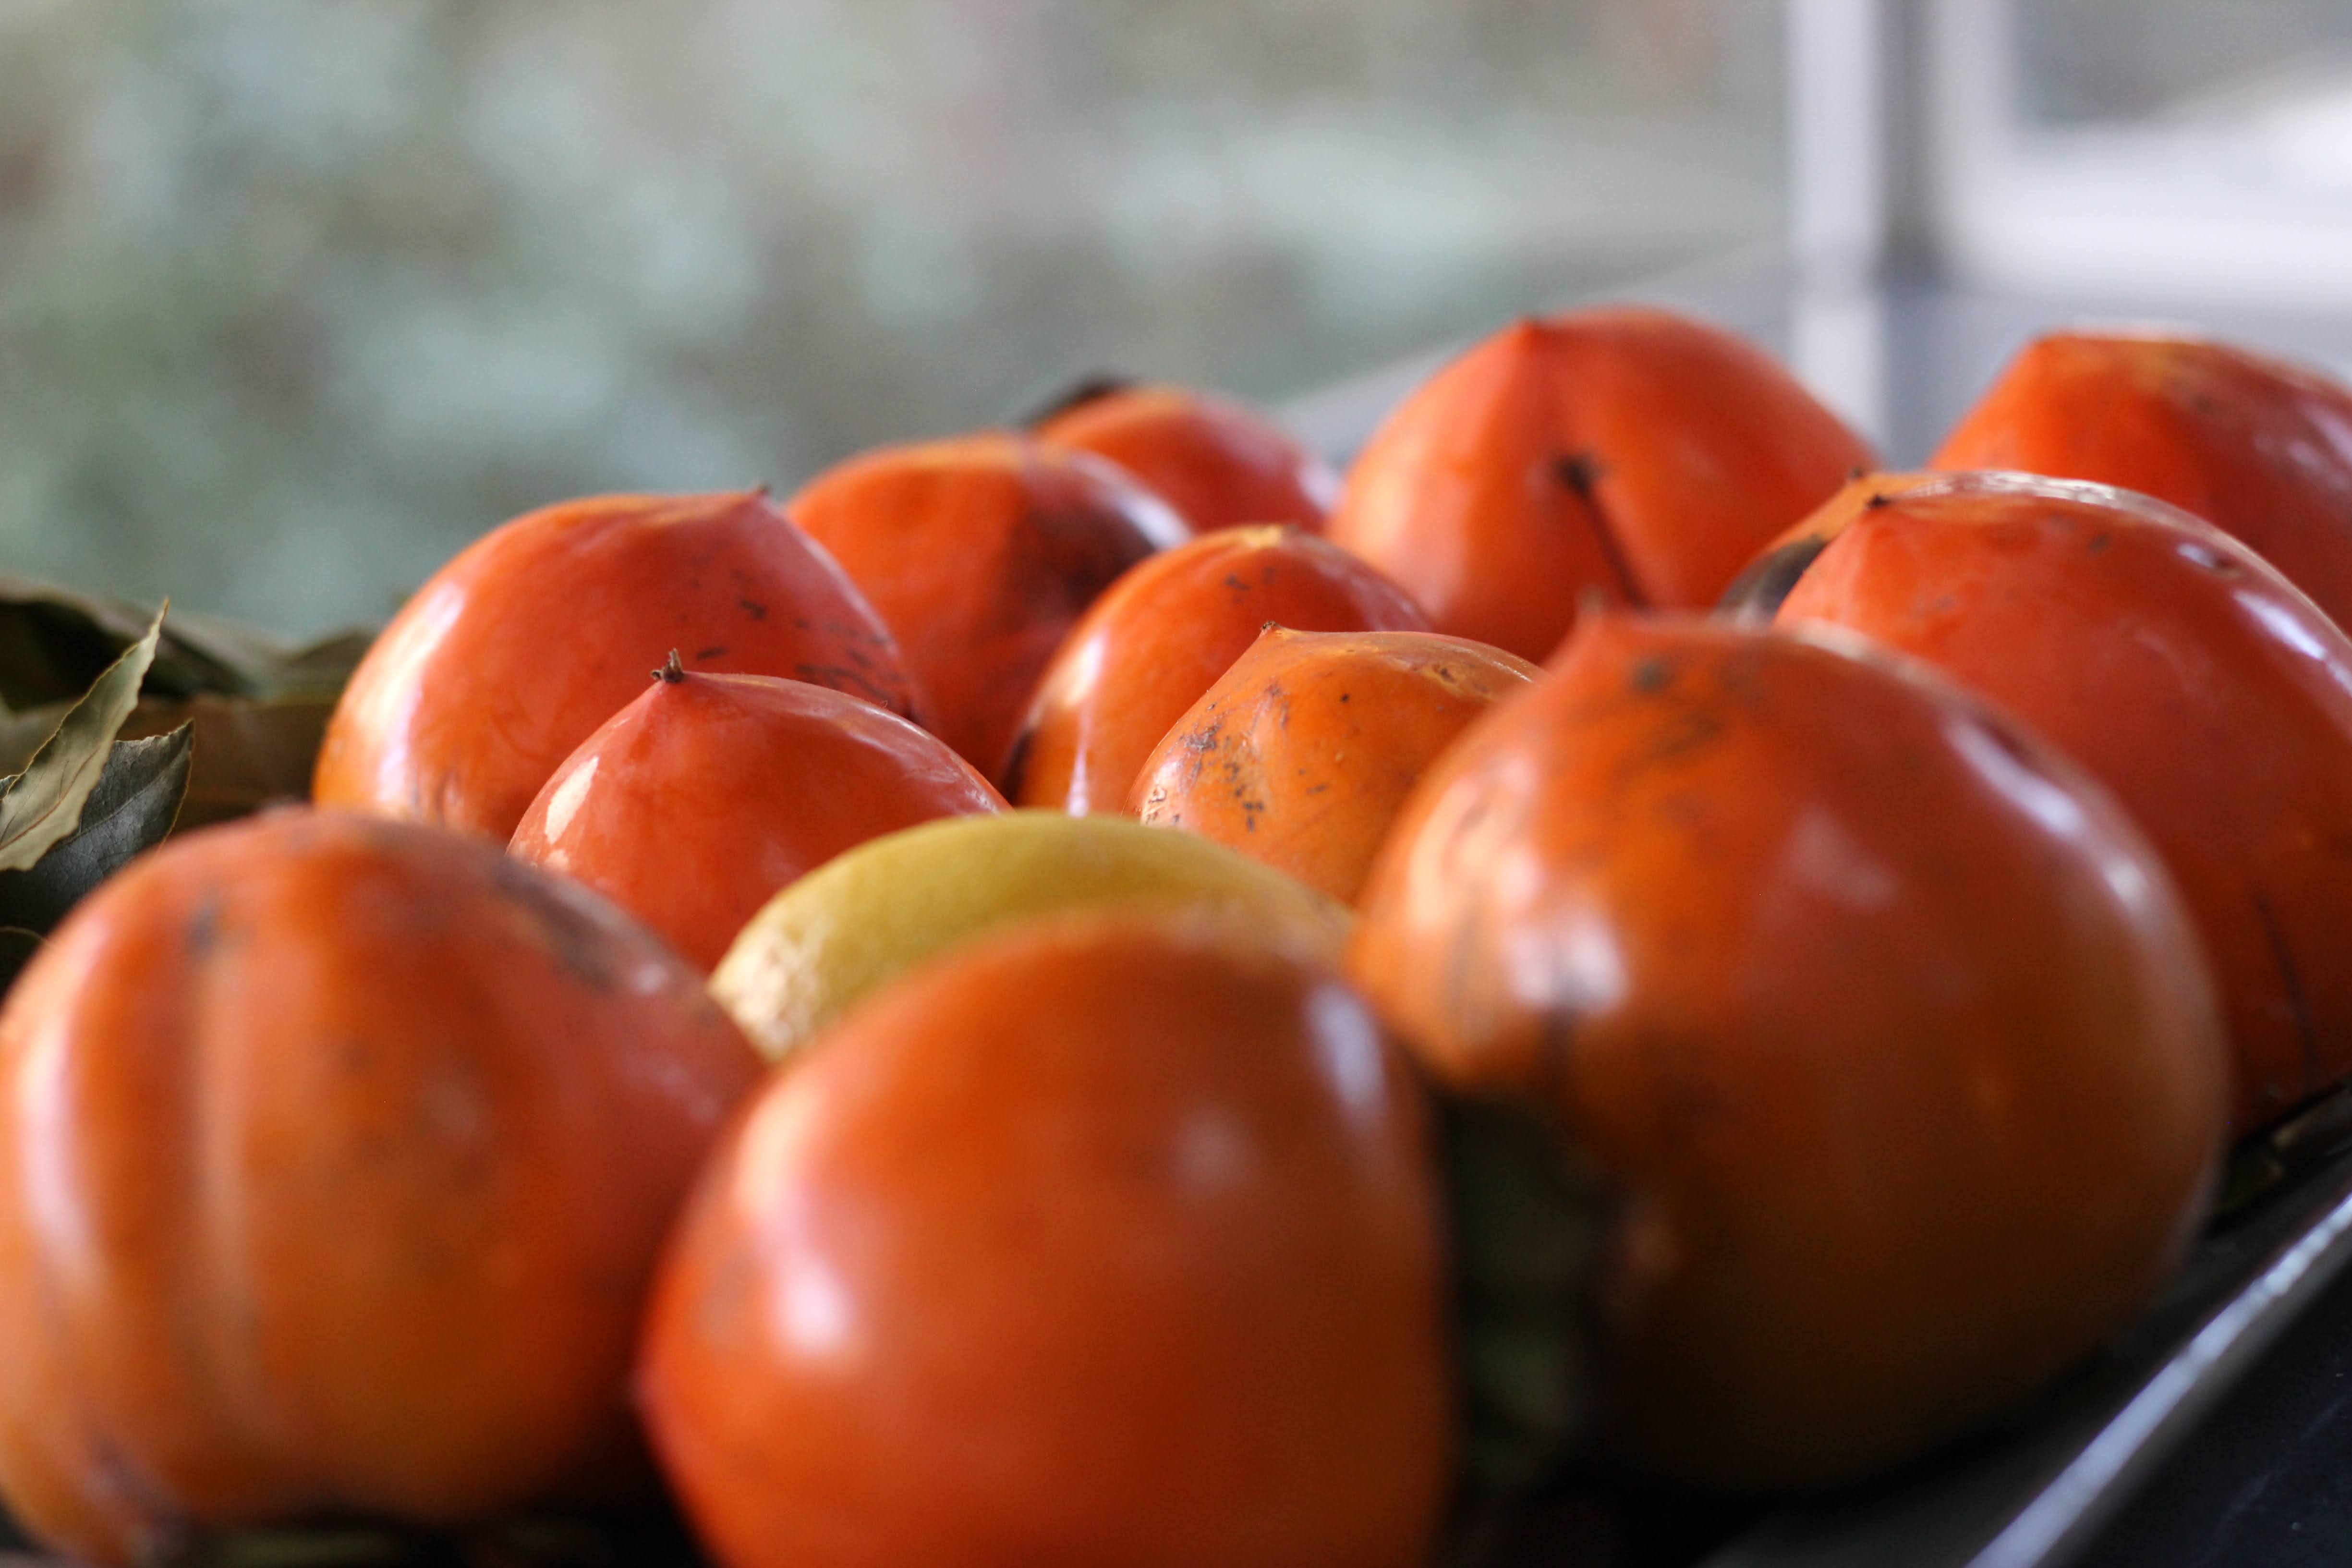 tray of persimmons